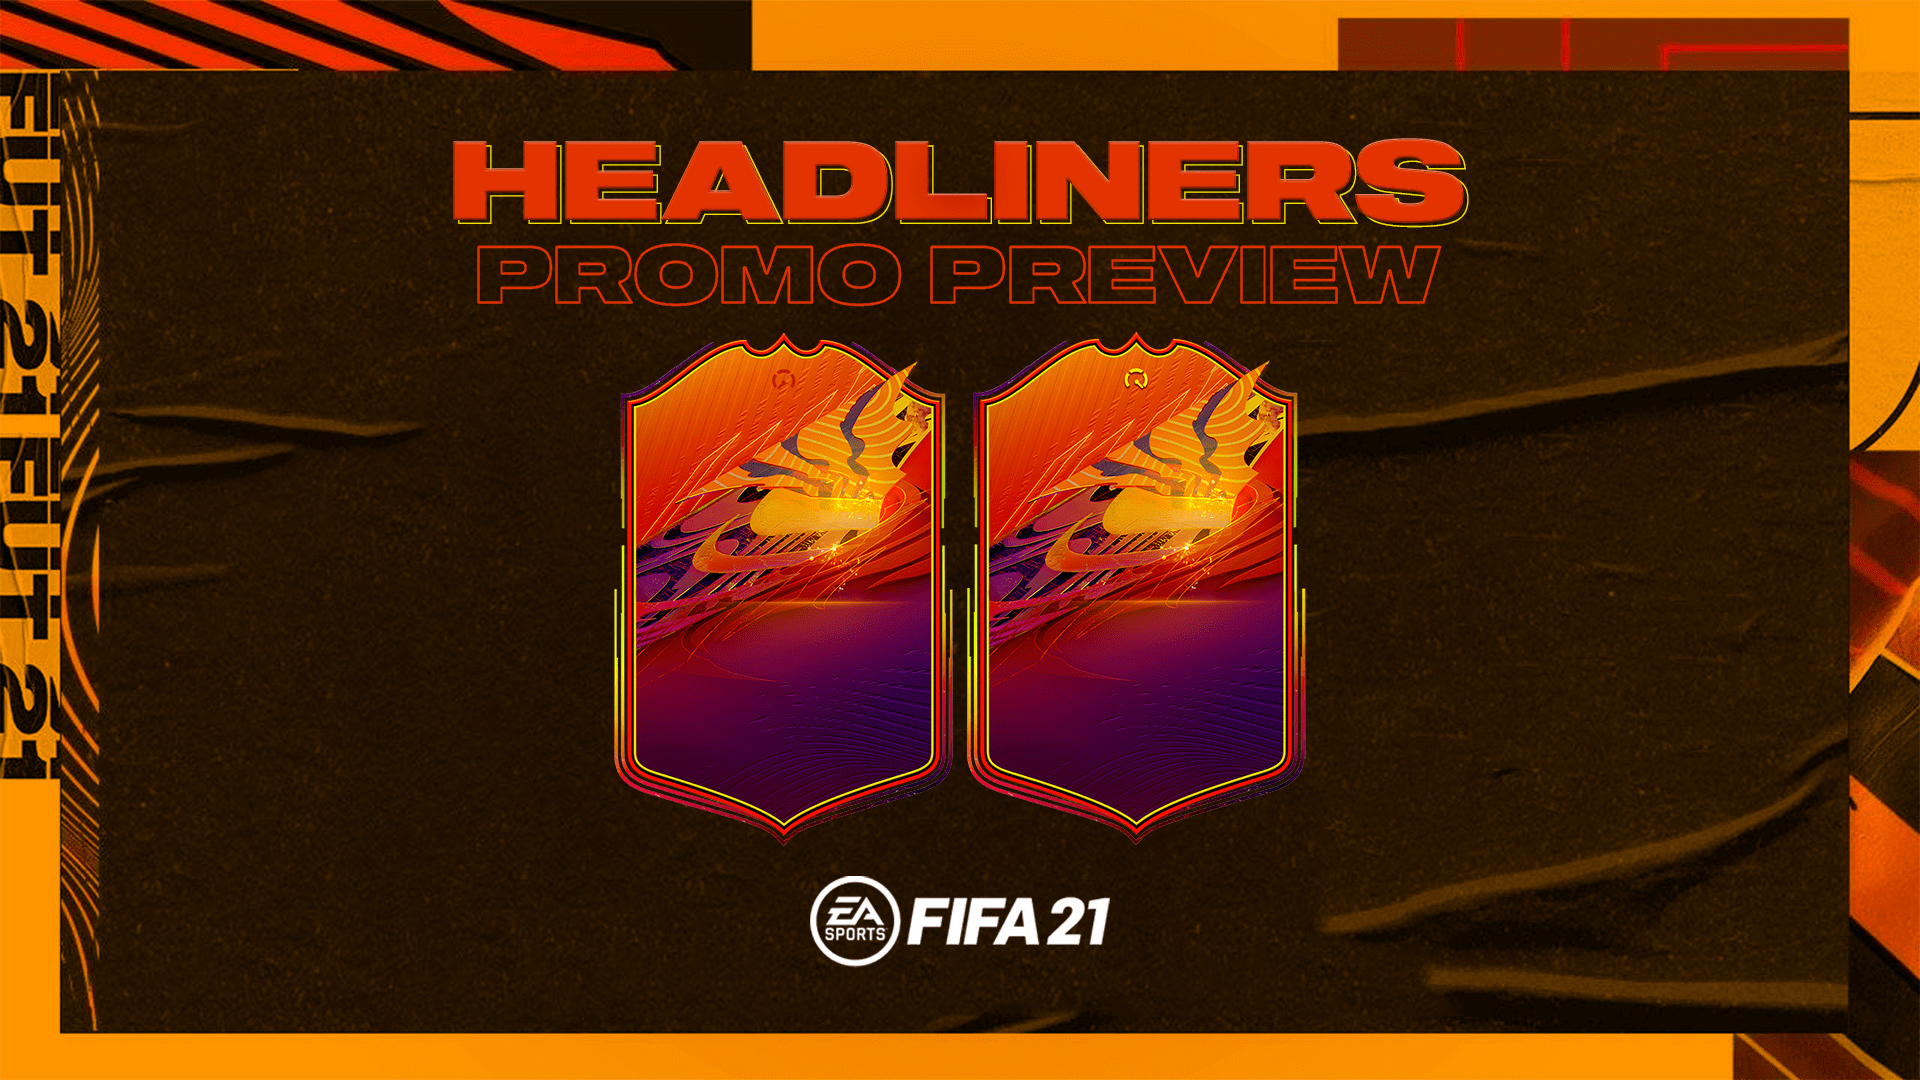 Fifa 21 Headliners Live Headliners Team 2 Squad Release Date And Time Predictions Explained Loading Screen